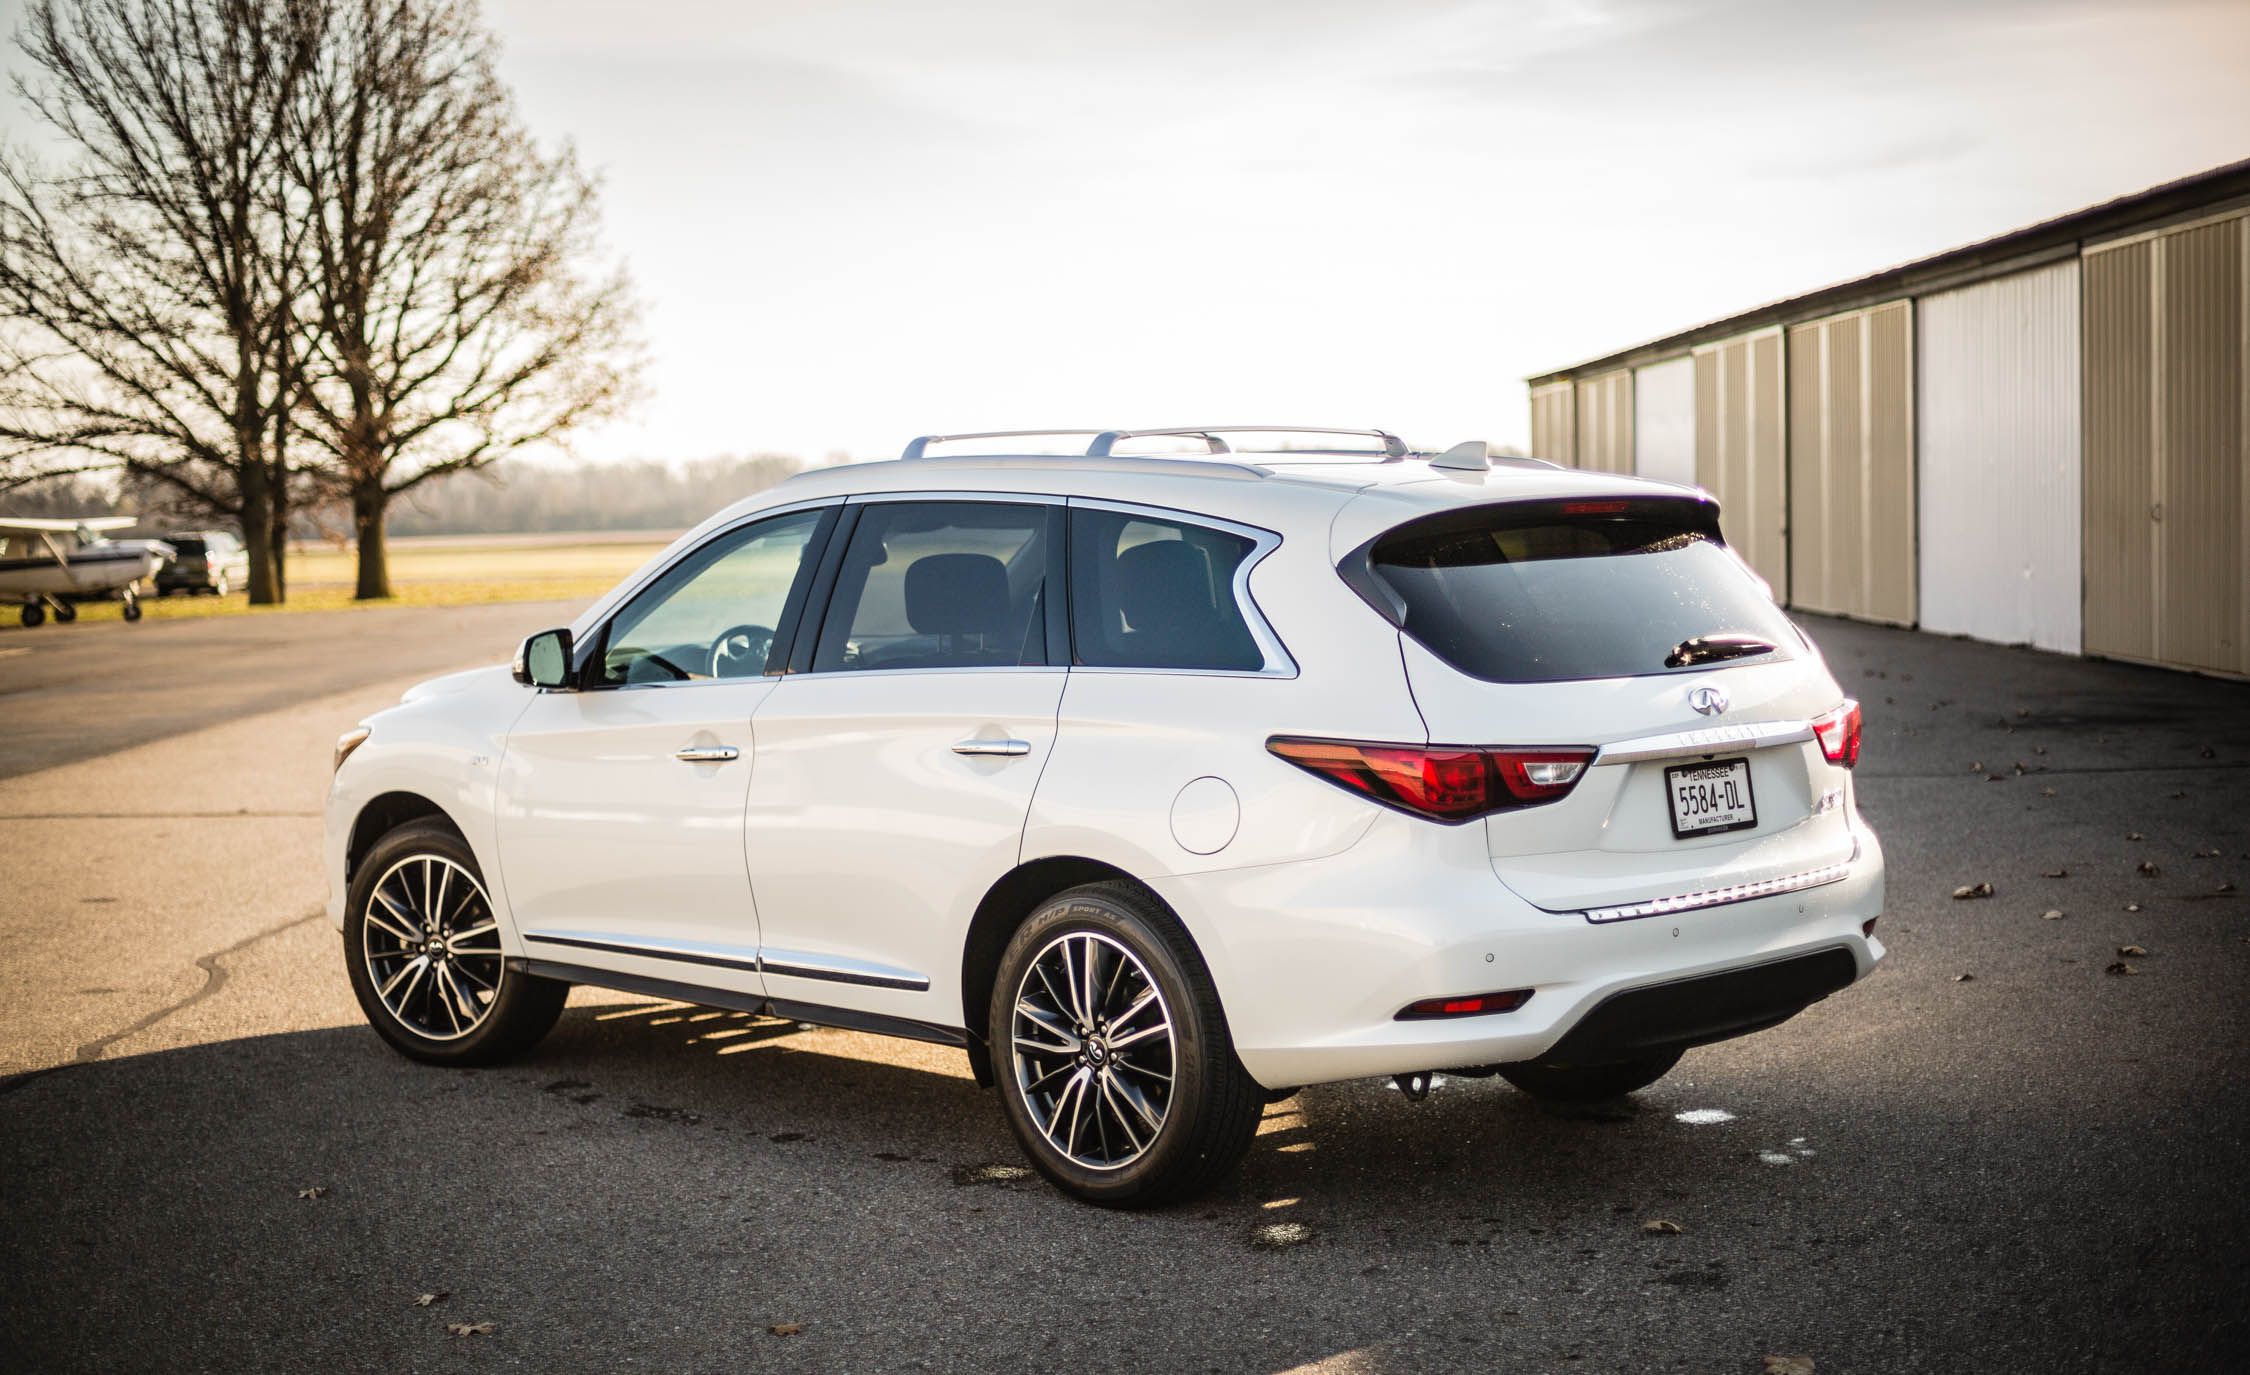 2017 Infiniti Qx60 White Exterior Rear And Side (View 11 of 12)